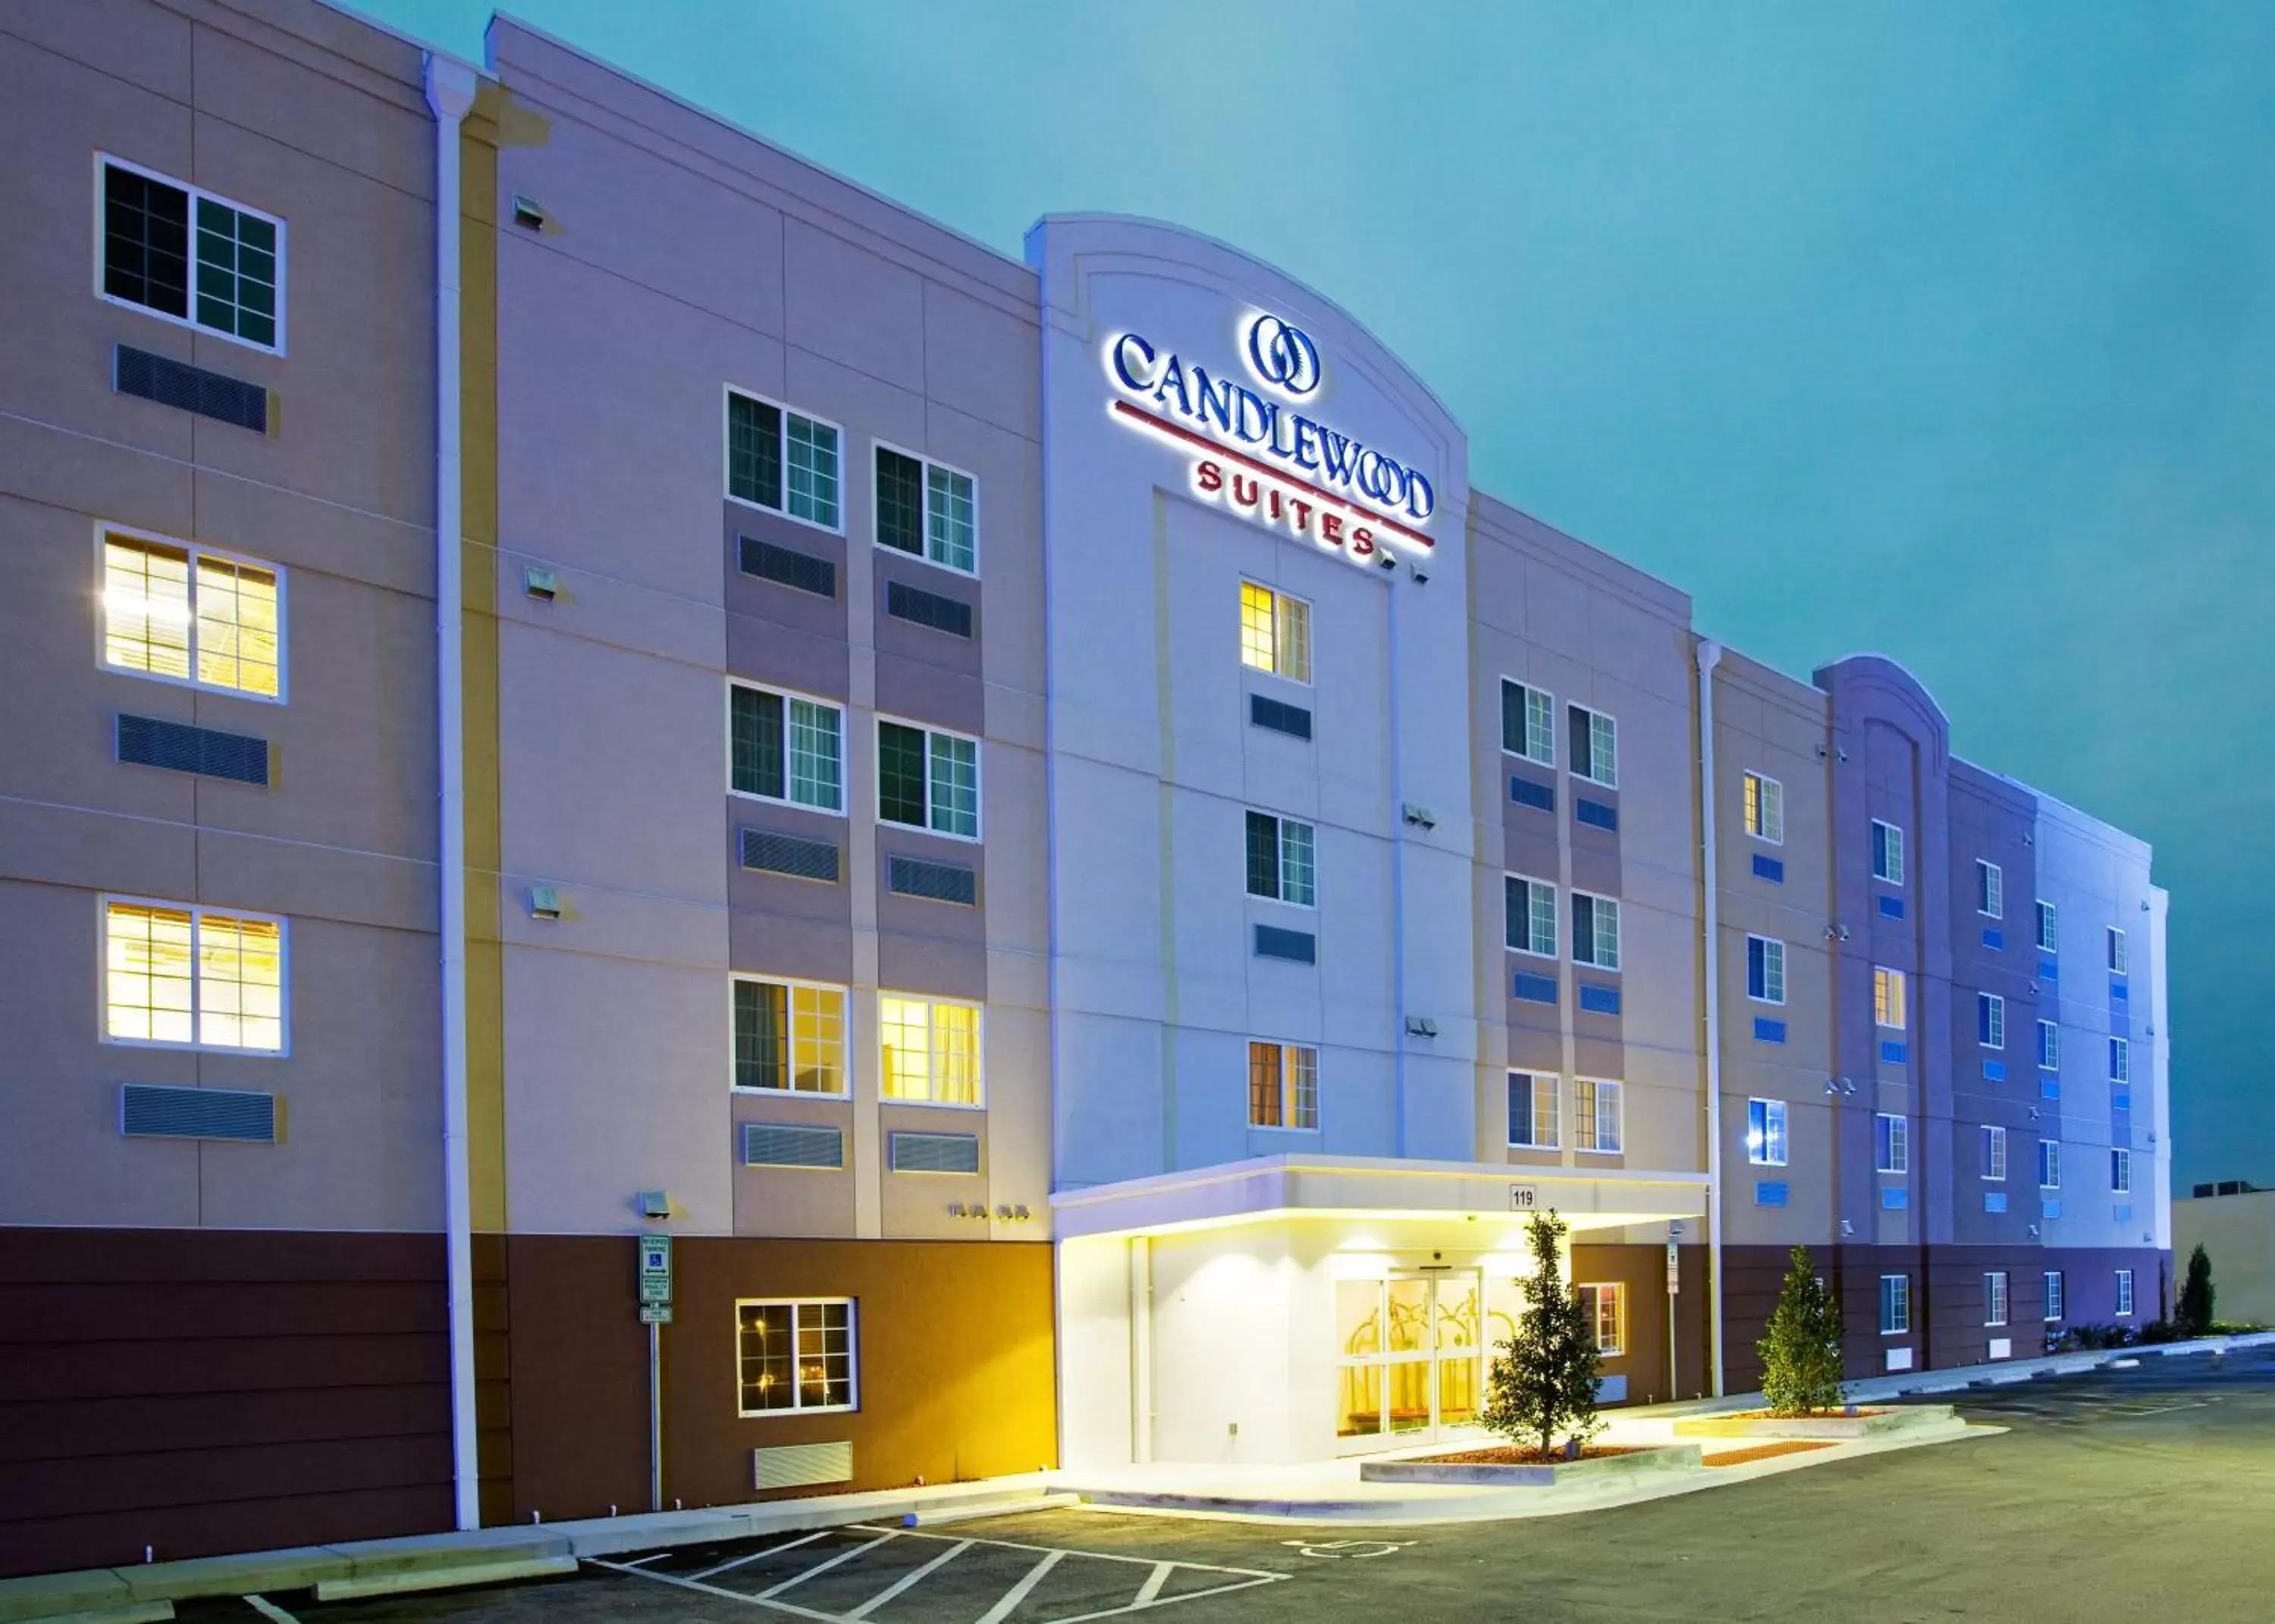 Property building in Candlewood Suites Jacksonville, an IHG Hotel